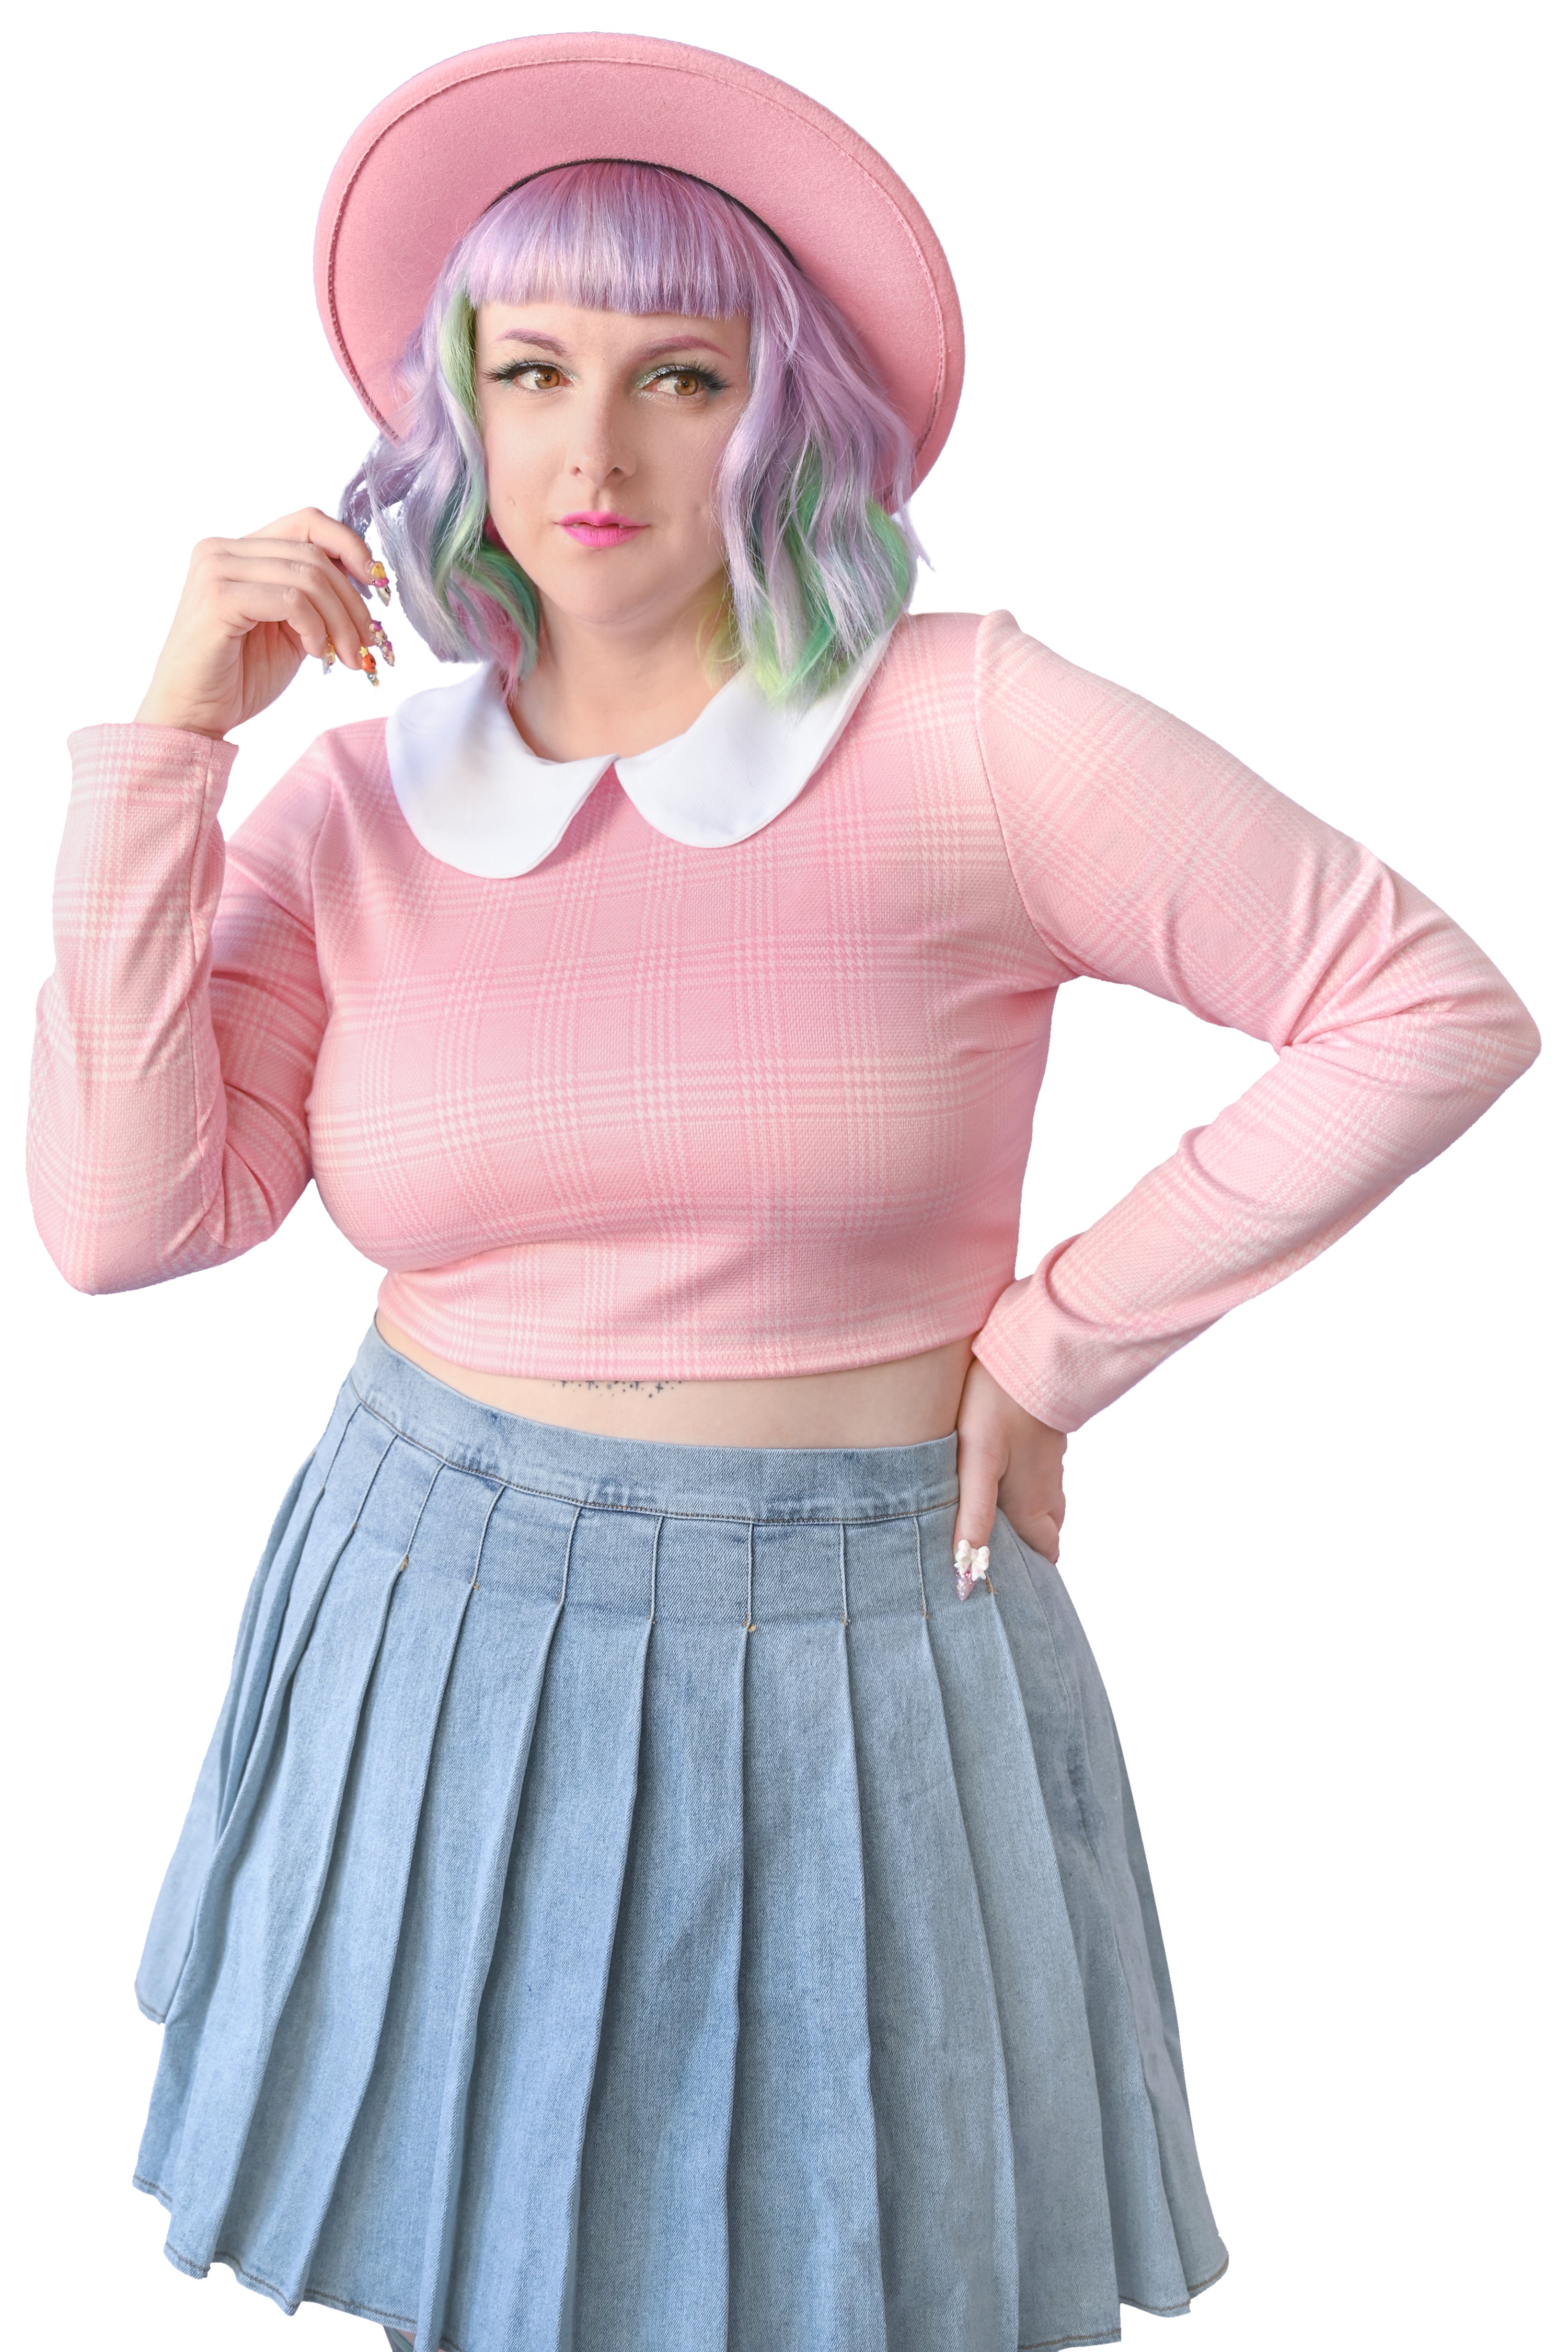 Long sleeve crop top with adorable Peter Pan collar detail. Back neck keyhole with button closure